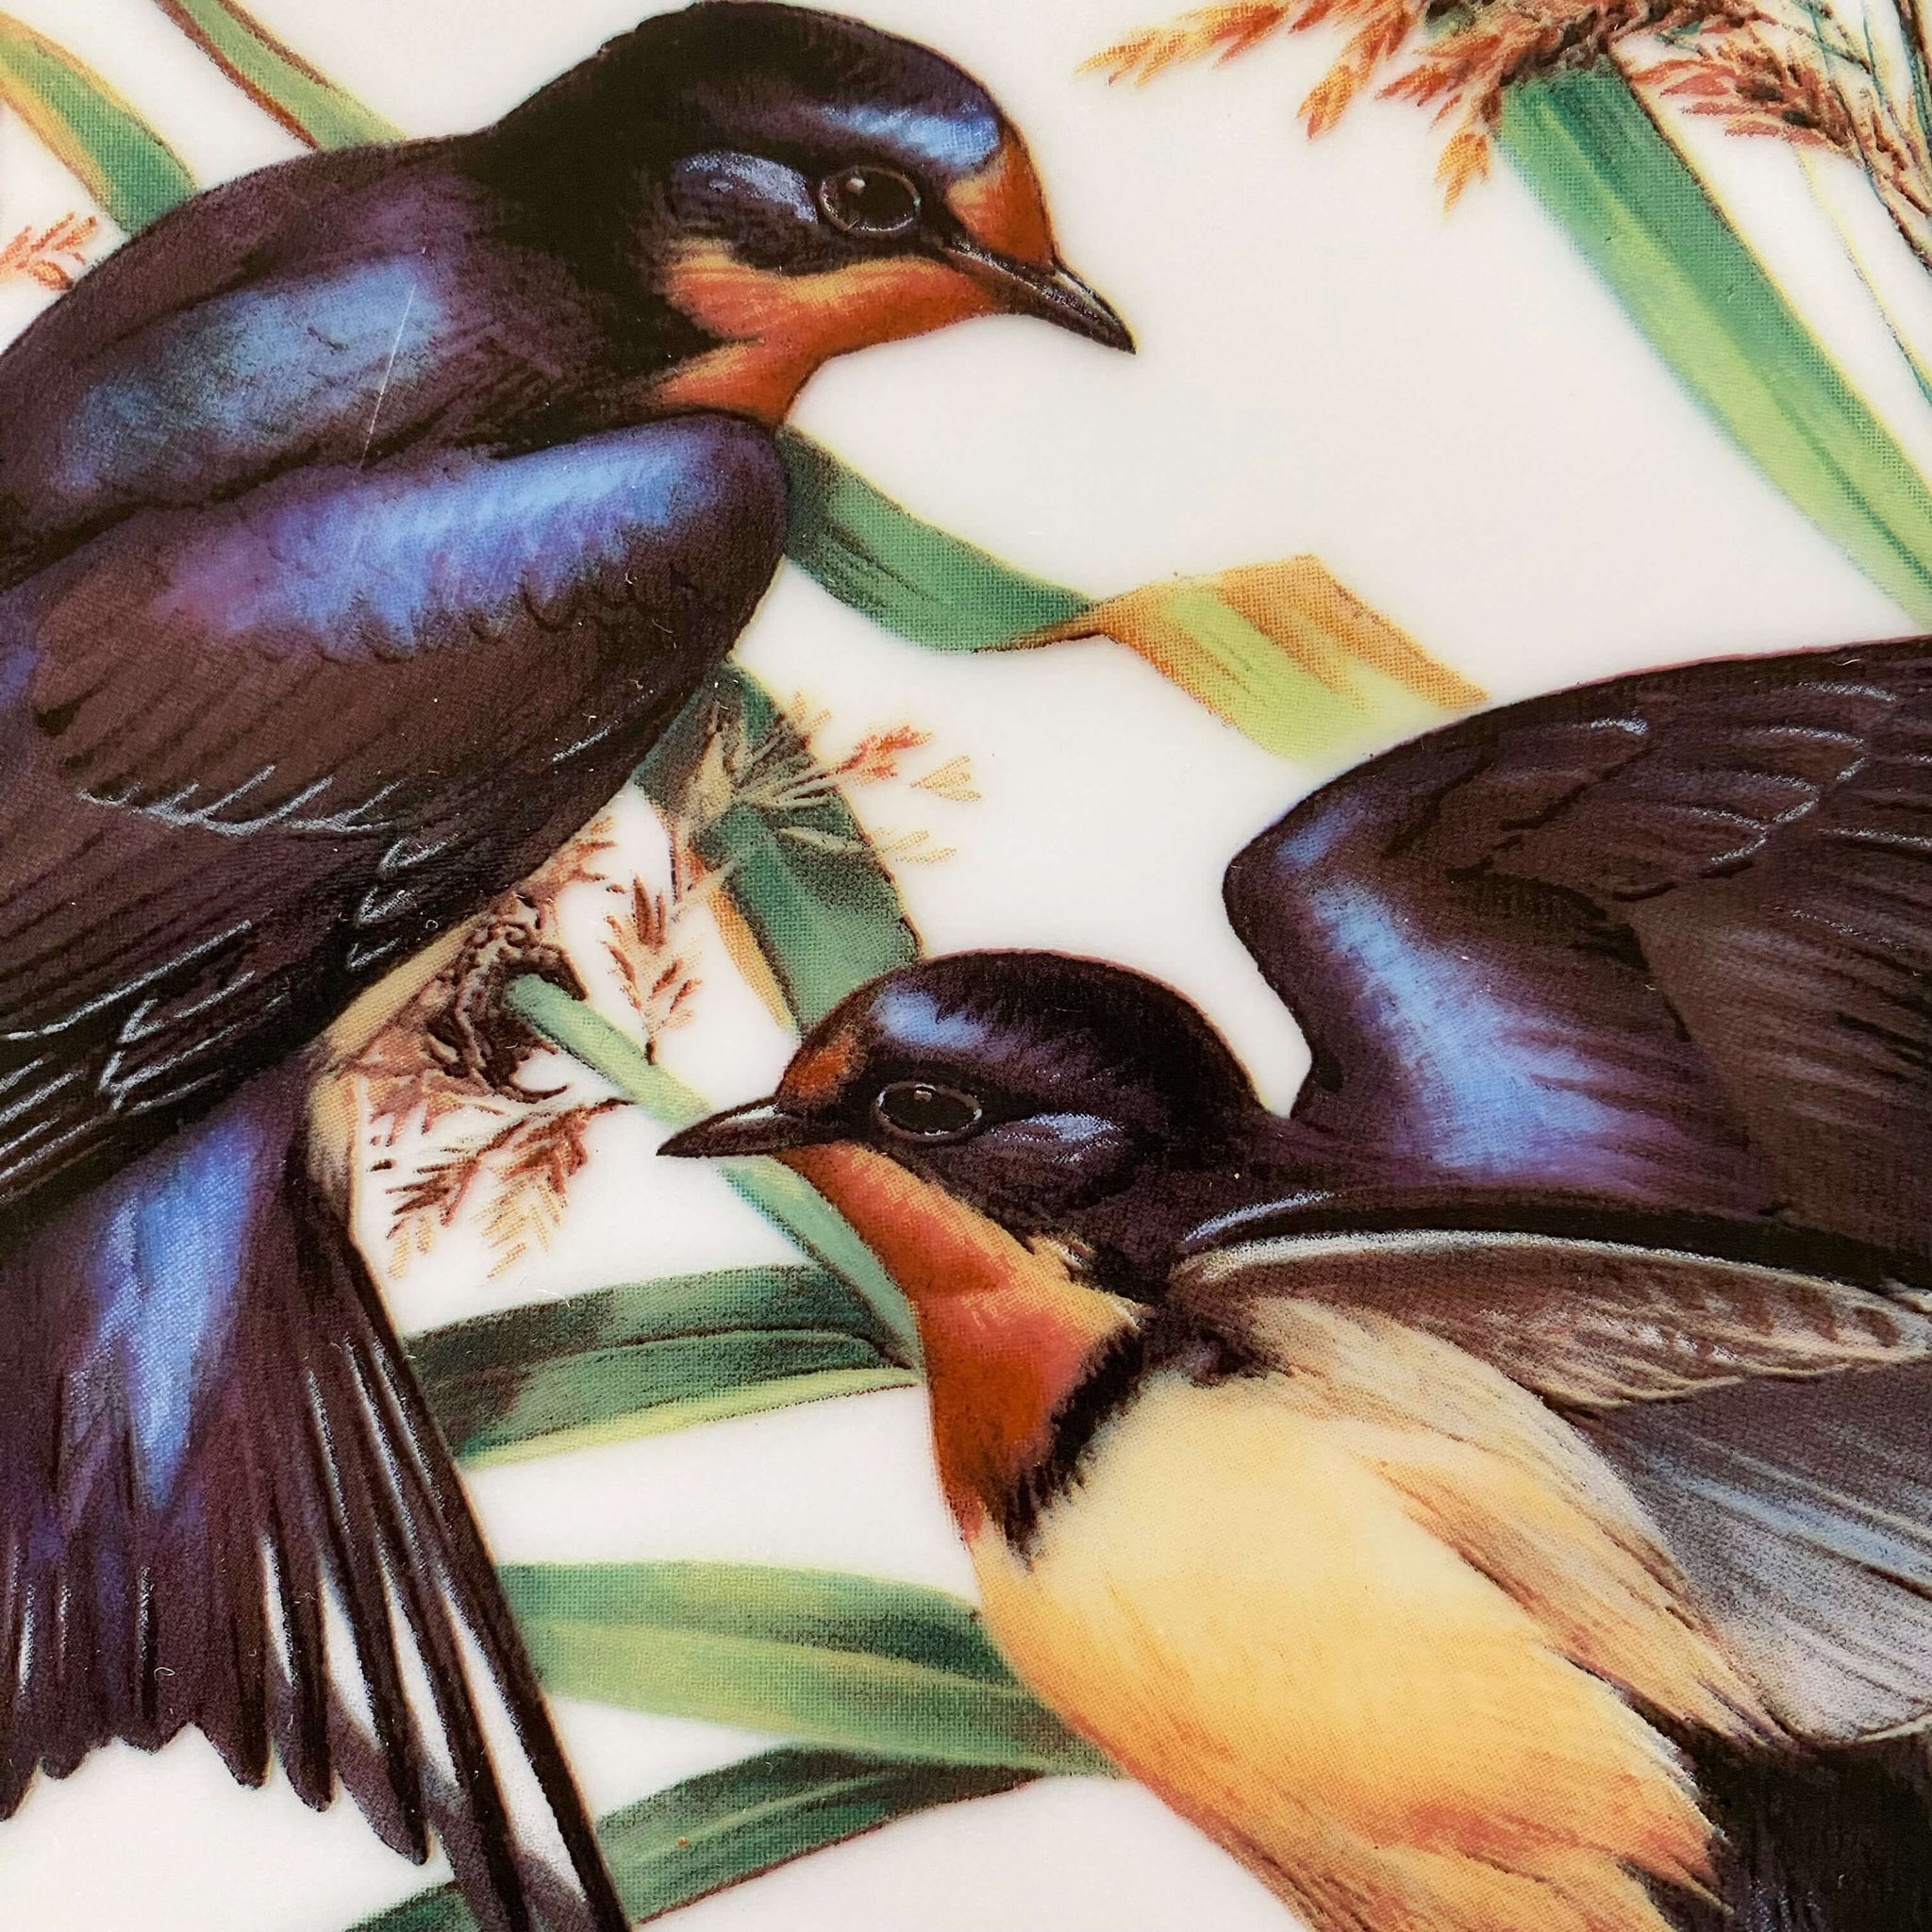 Vintage French Porcelain Bird Plate with Barn Swallows by Roger Tory Peterson circa 1981